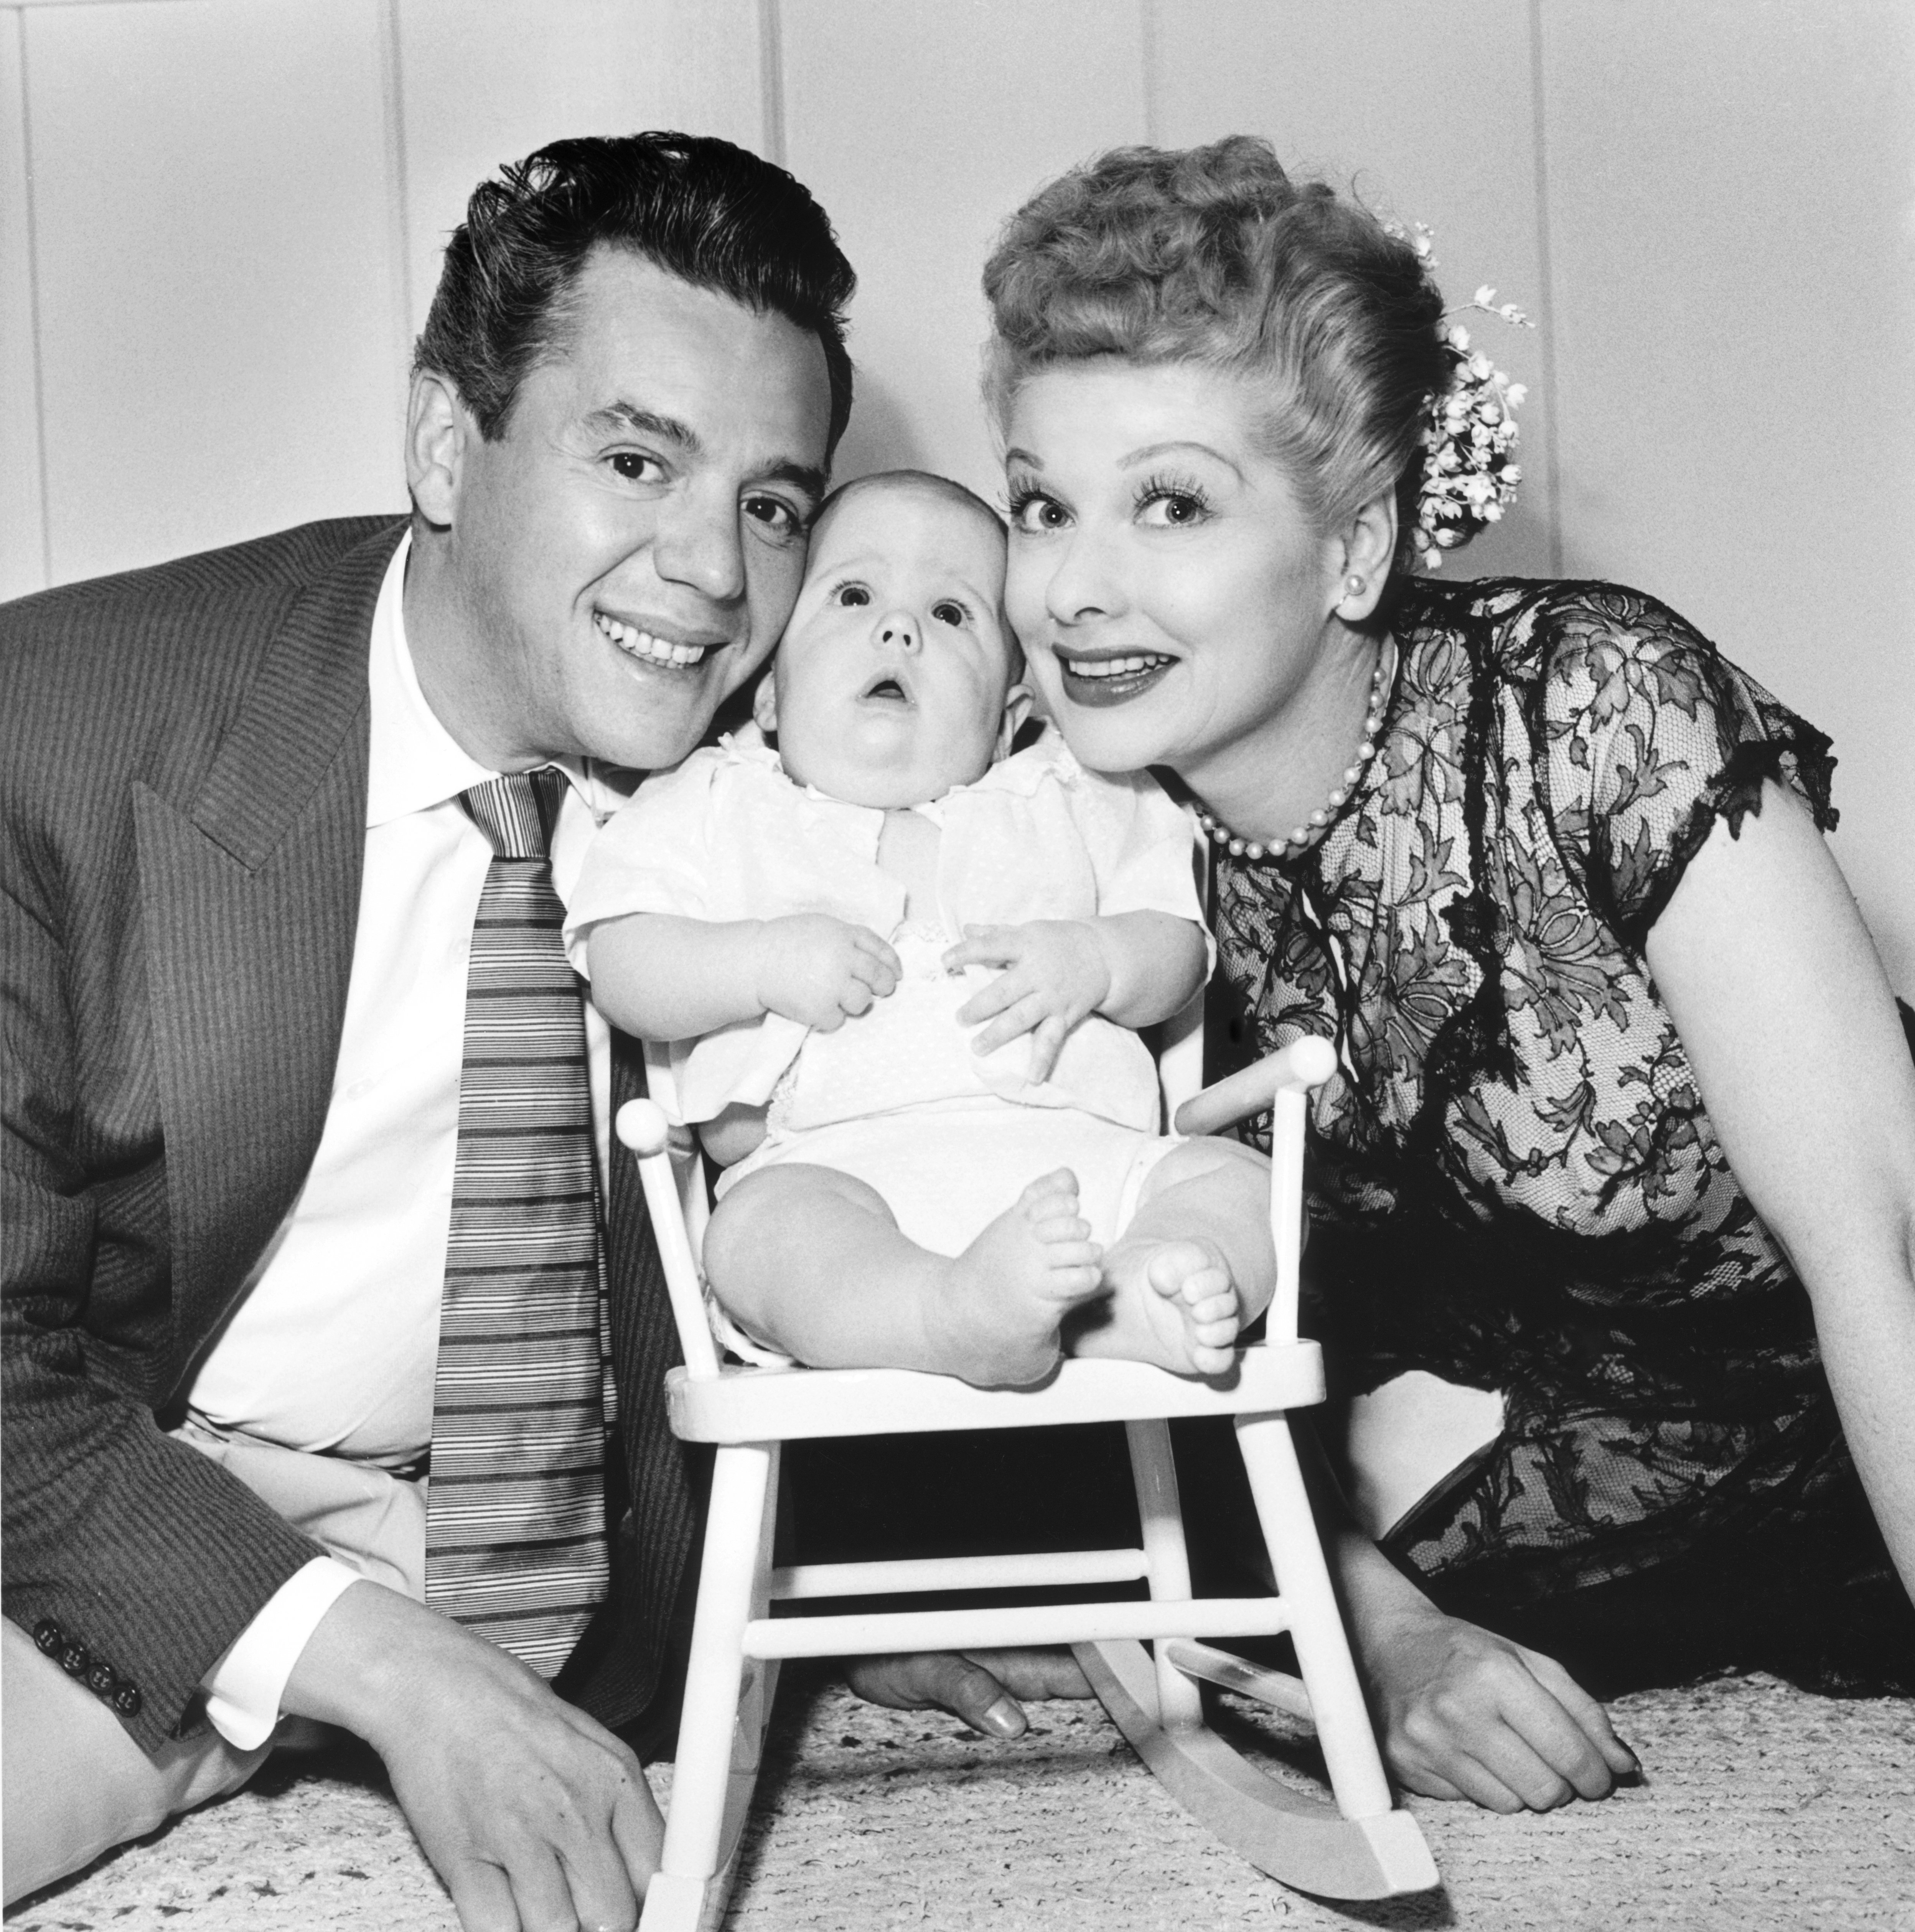 Desi Arnaz and Lucille Ball with their son Desi Arnaz Jr. at their home in California, January 1953. | Source: Getty Images